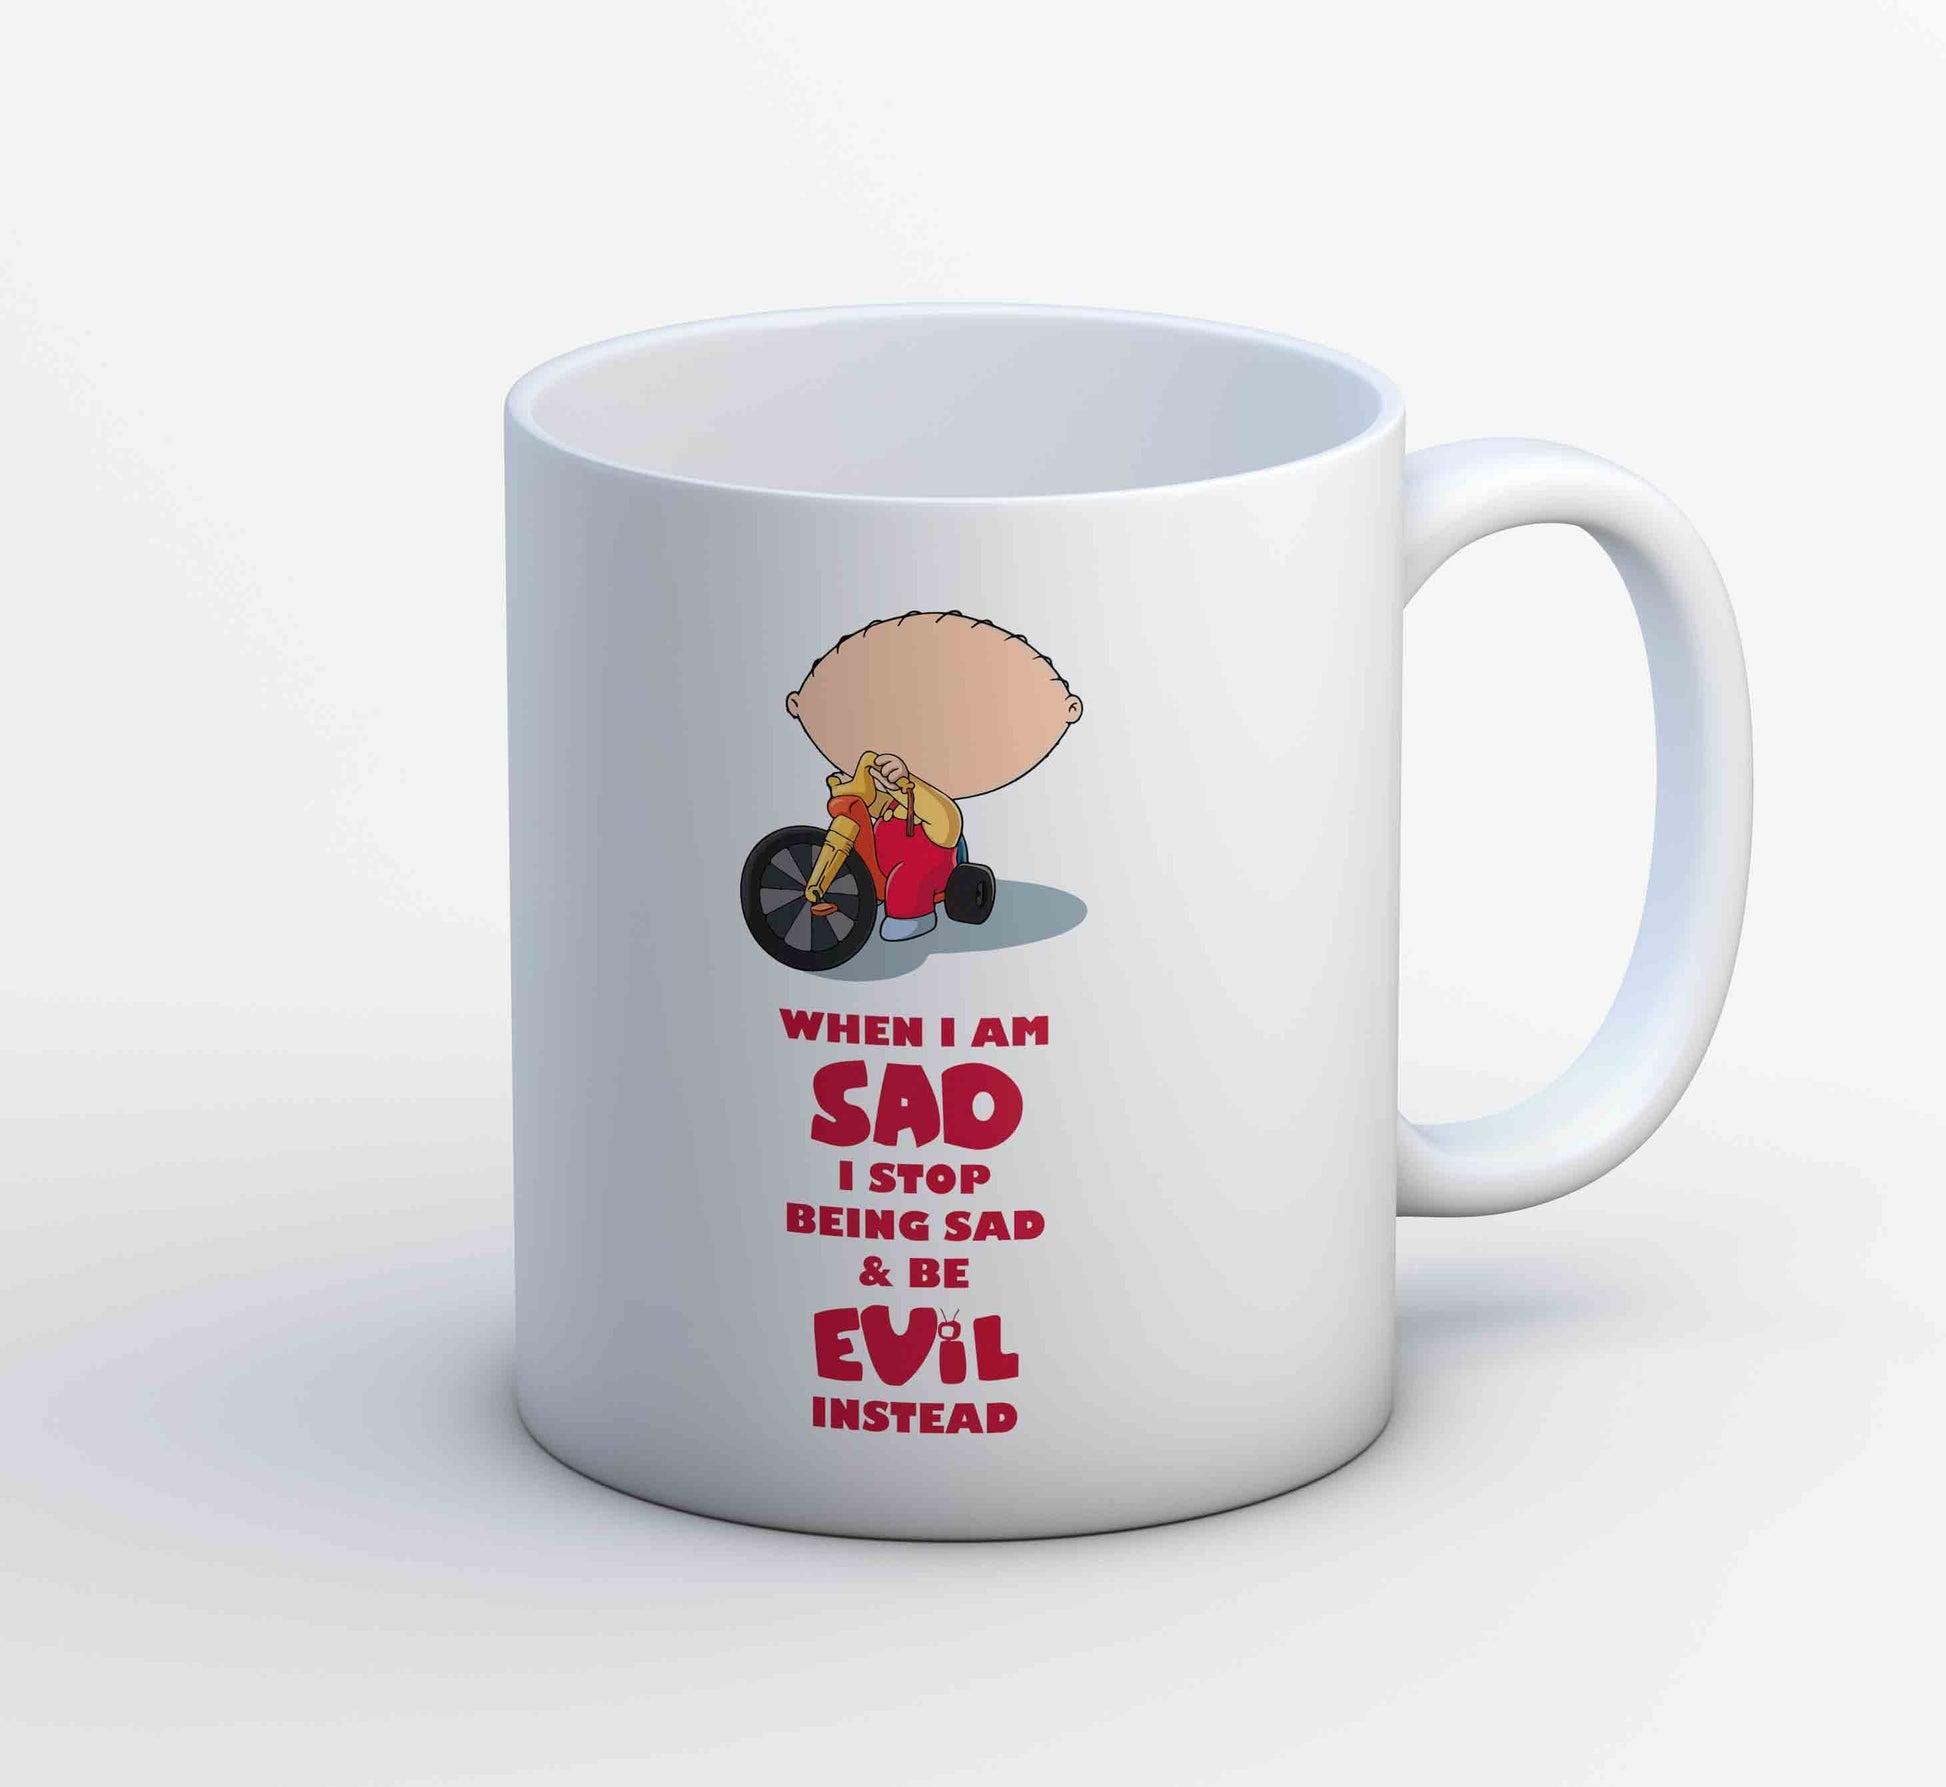 family guy be evil instead mug coffee ceramic tv & movies buy online india the banyan tee tbt men women girls boys unisex  - stewie griffin dialogue